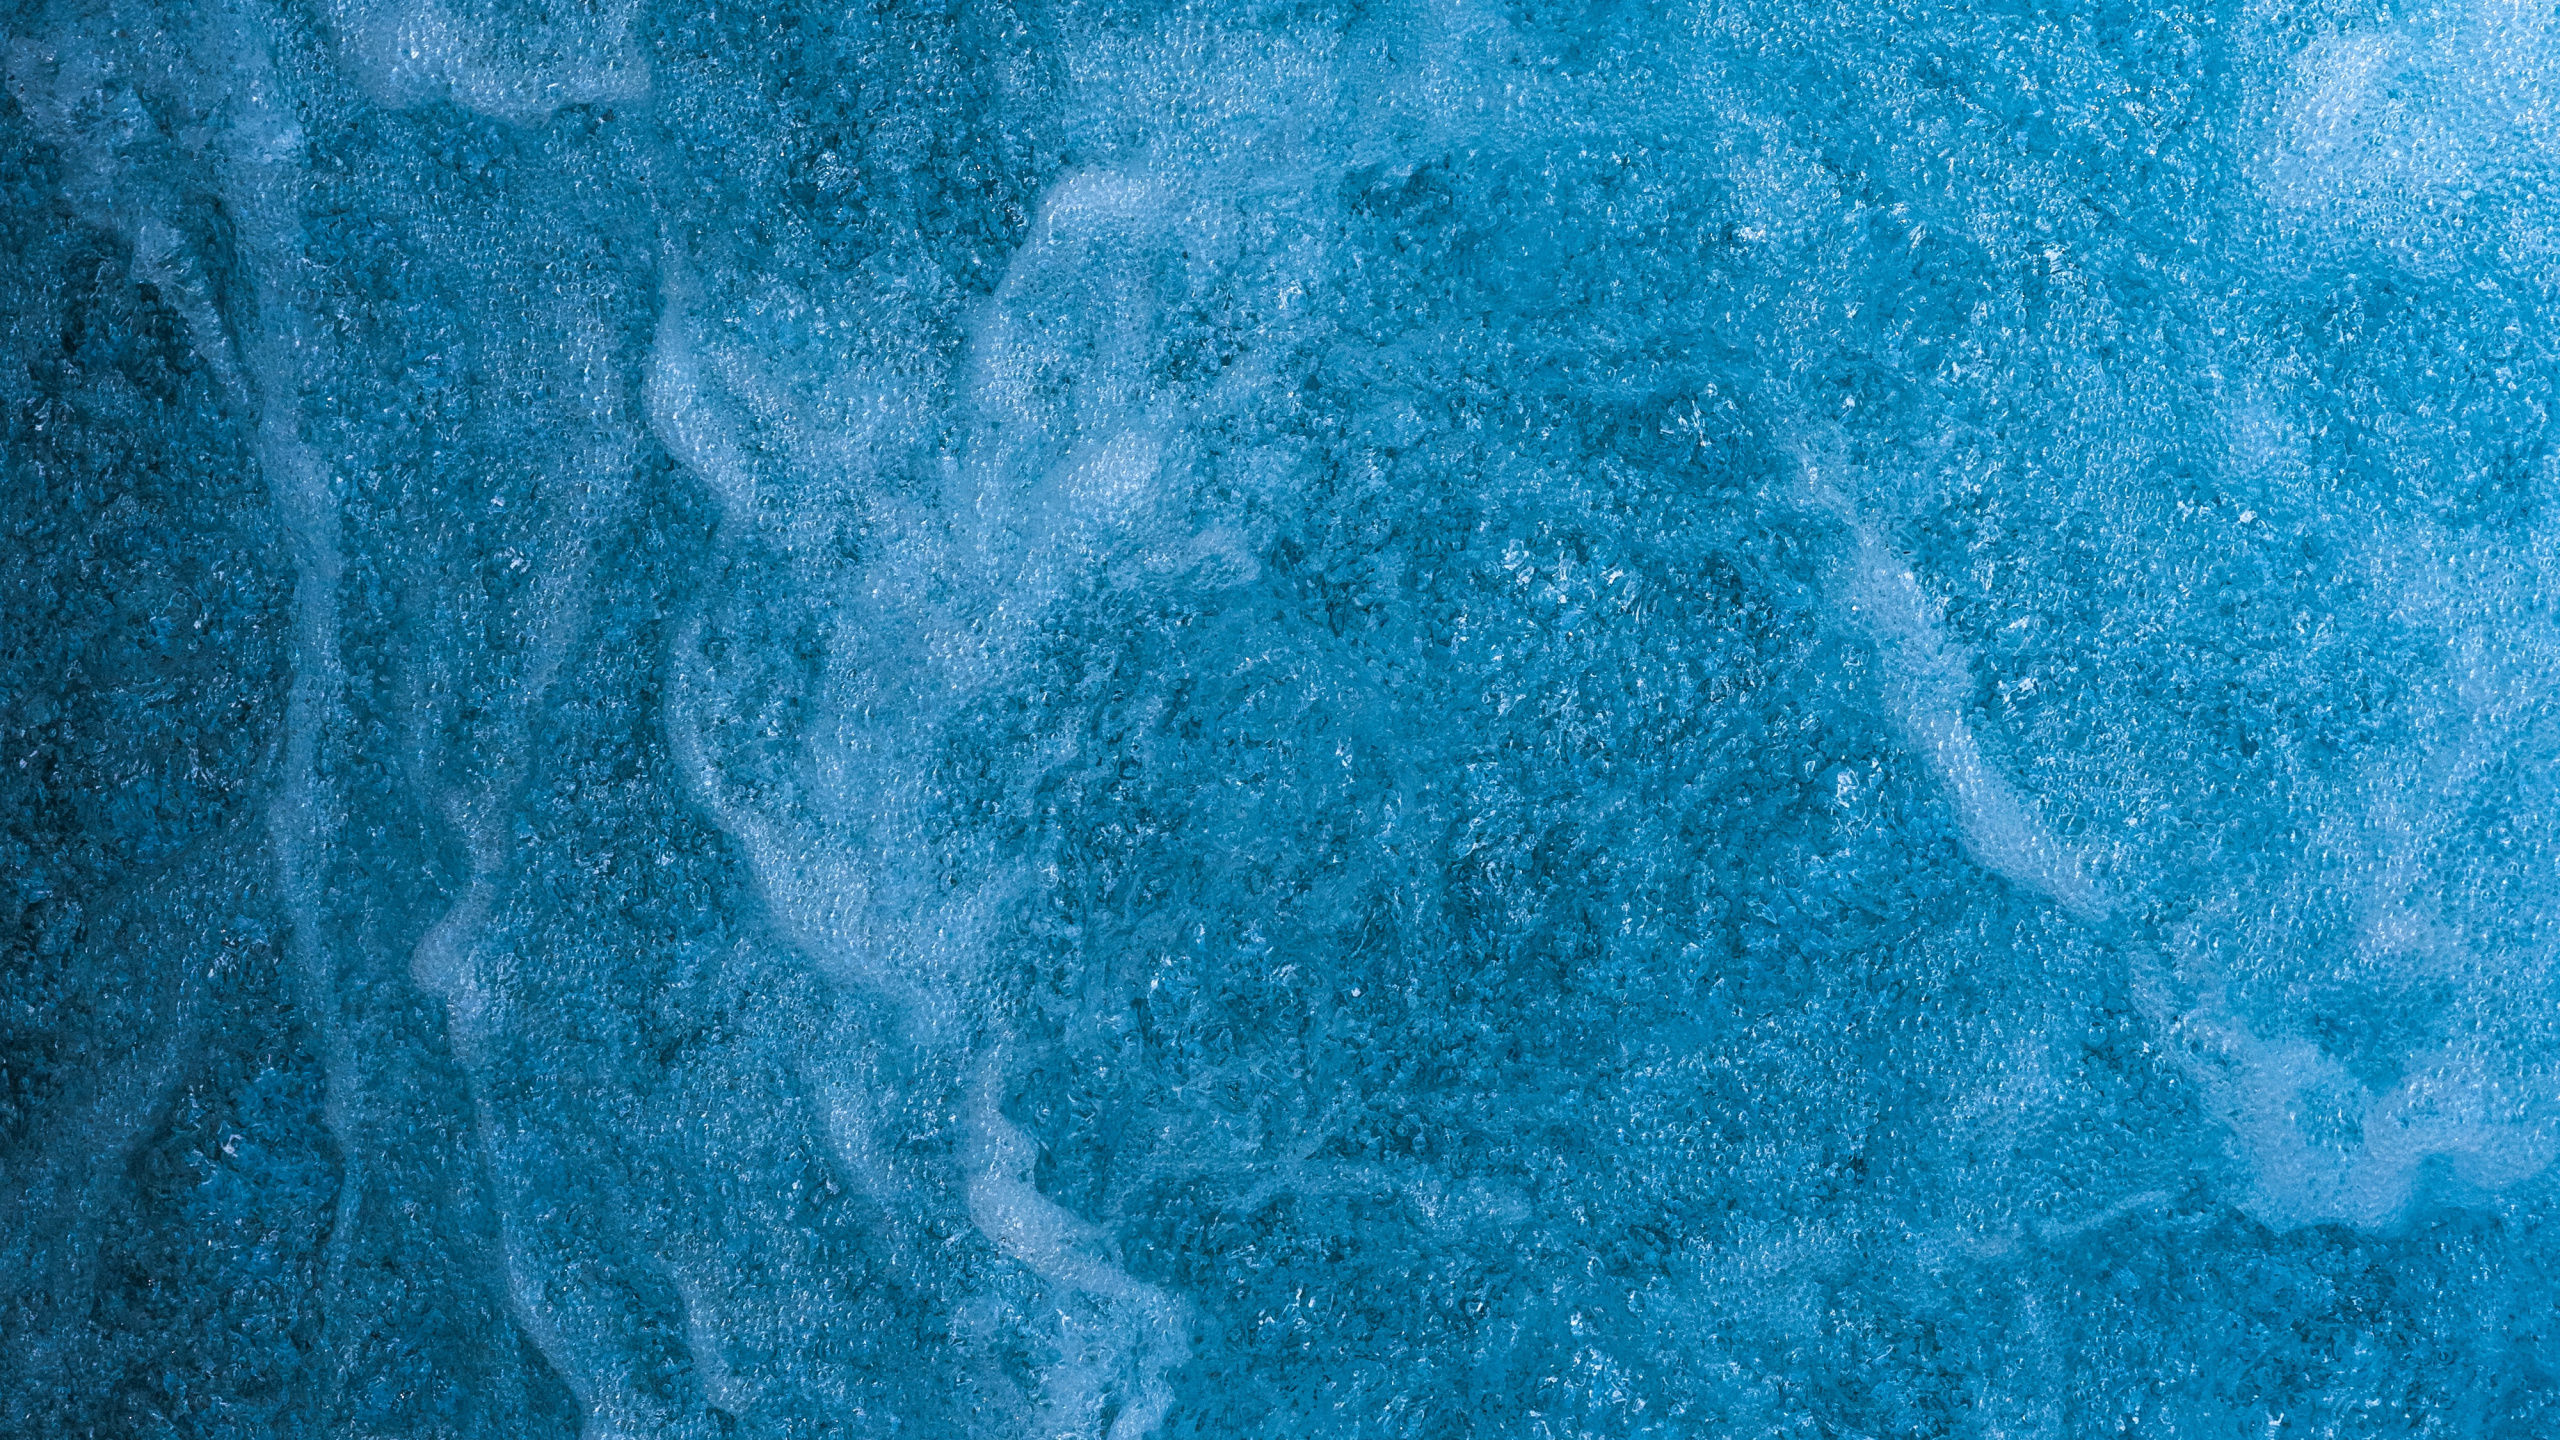 Texture, Water, Blue, Aqua, Turquoise. Wallpaper in 2560x1440 Resolution